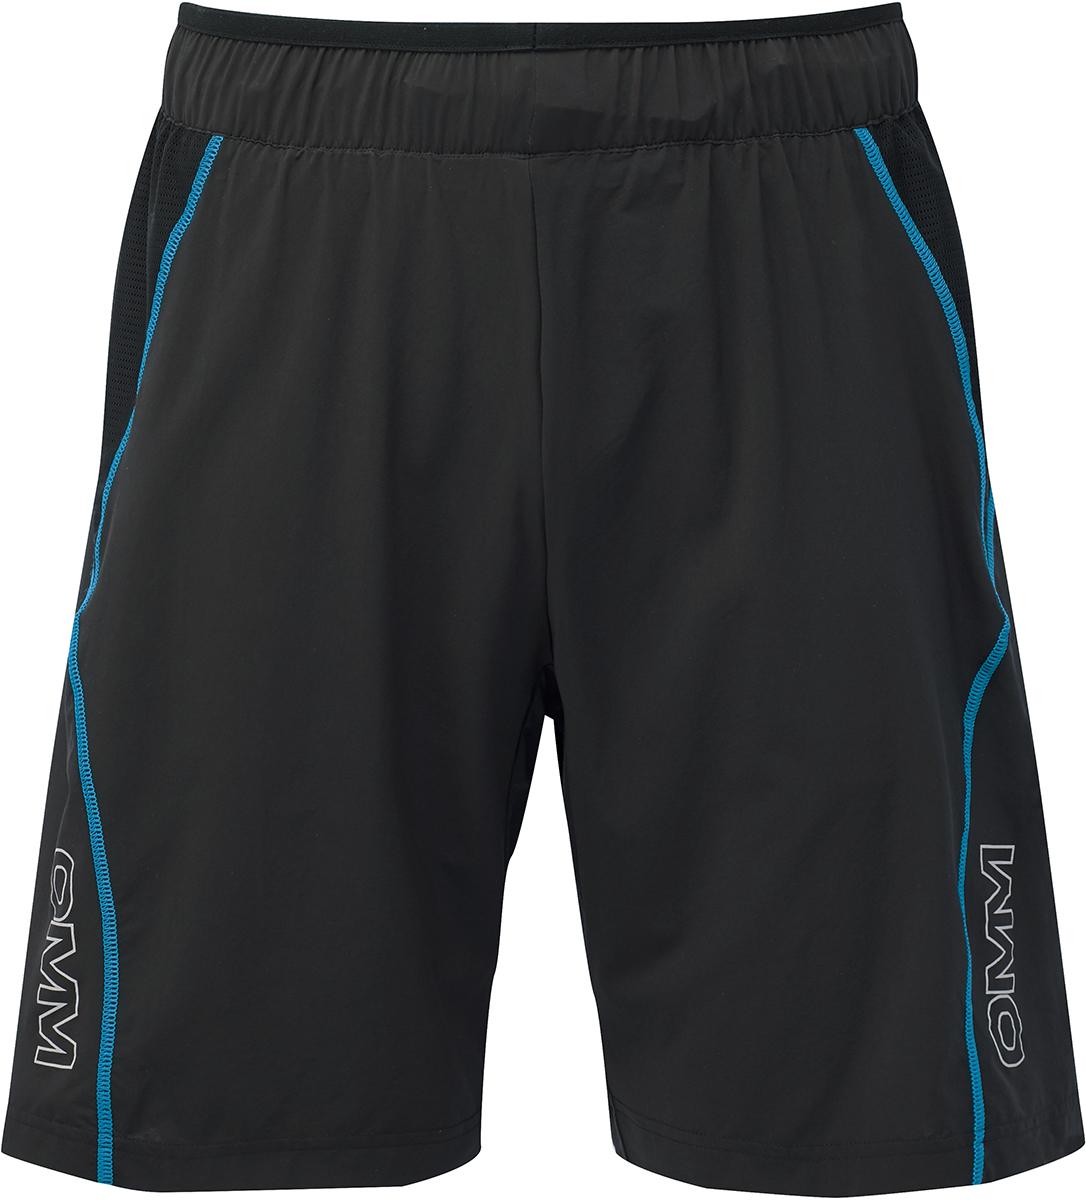 Omm Pace Shorts - Black/blue